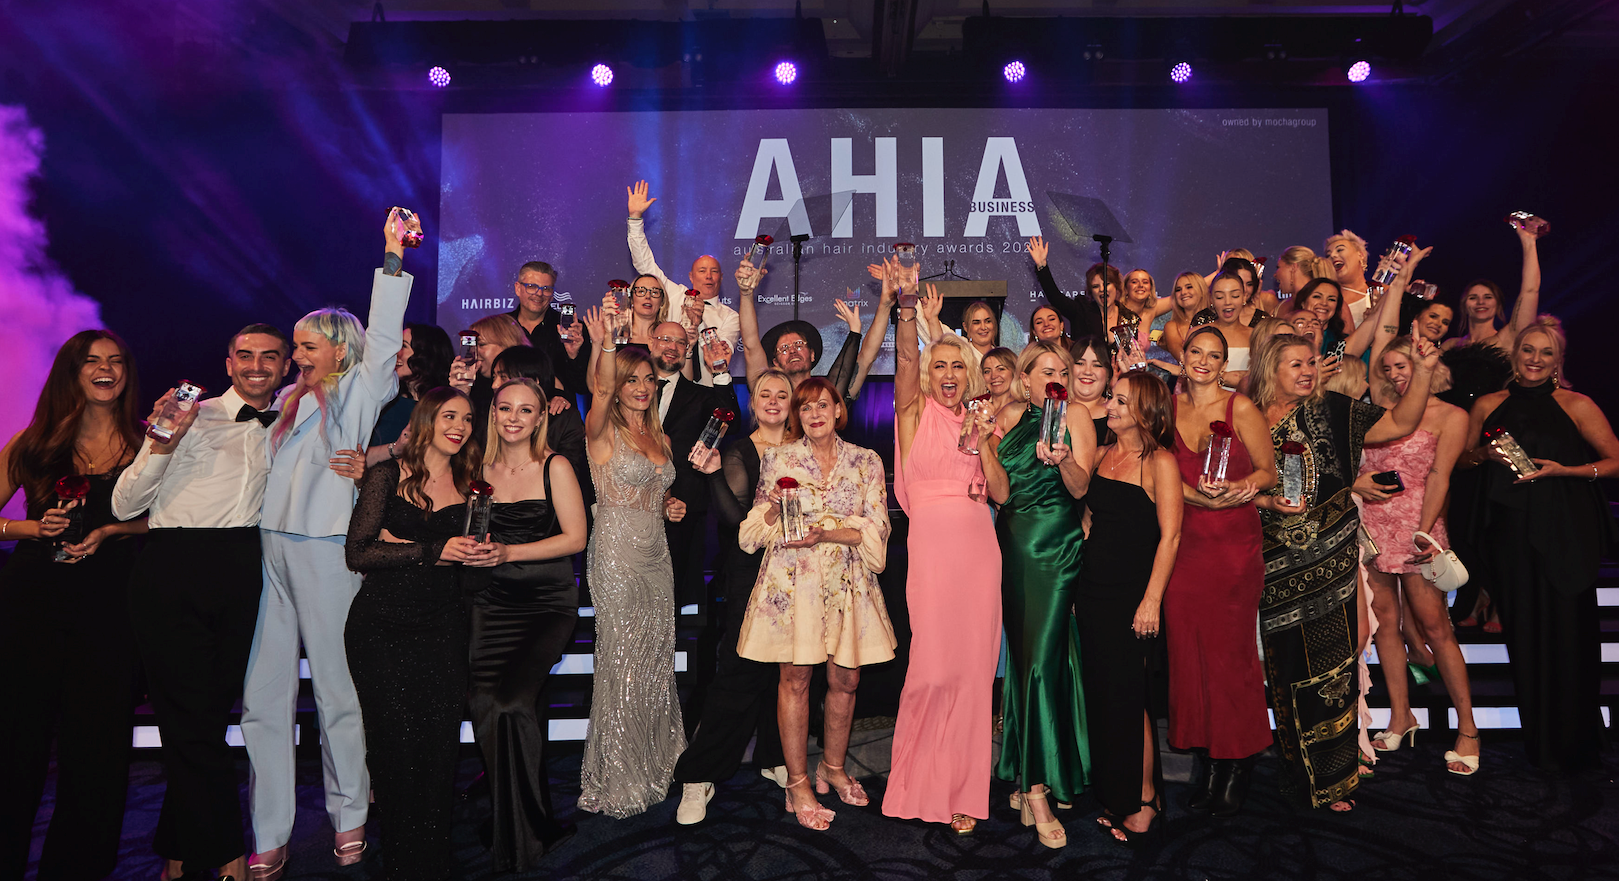 2023 AUSTRALIAN HAIR INDUSTRY AWARDS- BUSINESS CROWNS WINNERS FOR BIGGEST YEAR EVER!